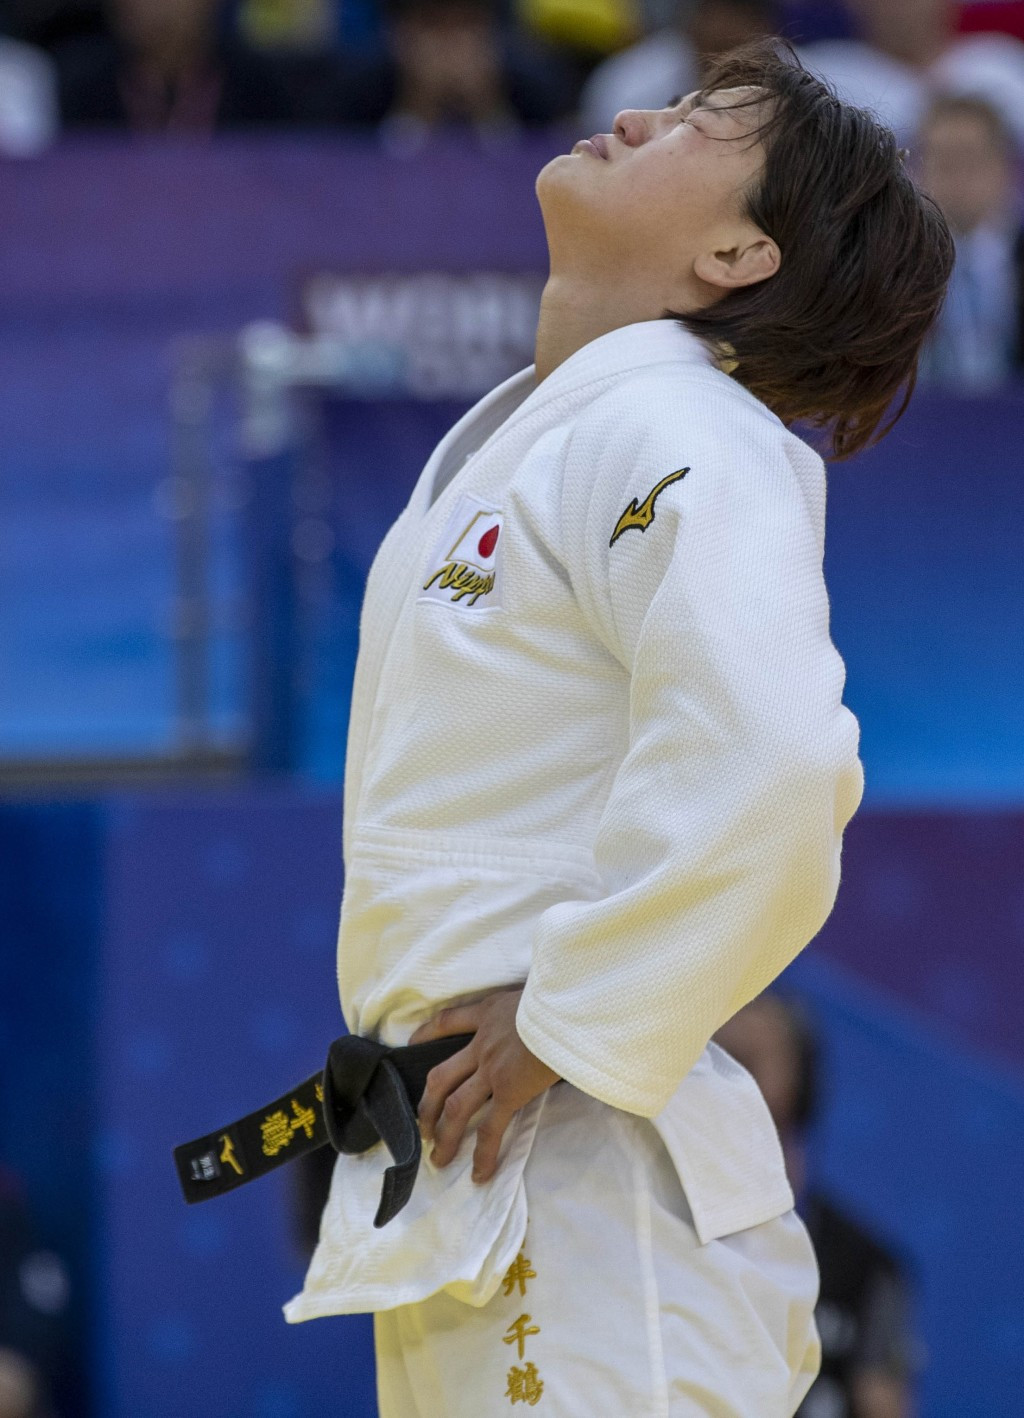 The four-time Grand Slam gold medallist was emotional after claiming victory ©IJF